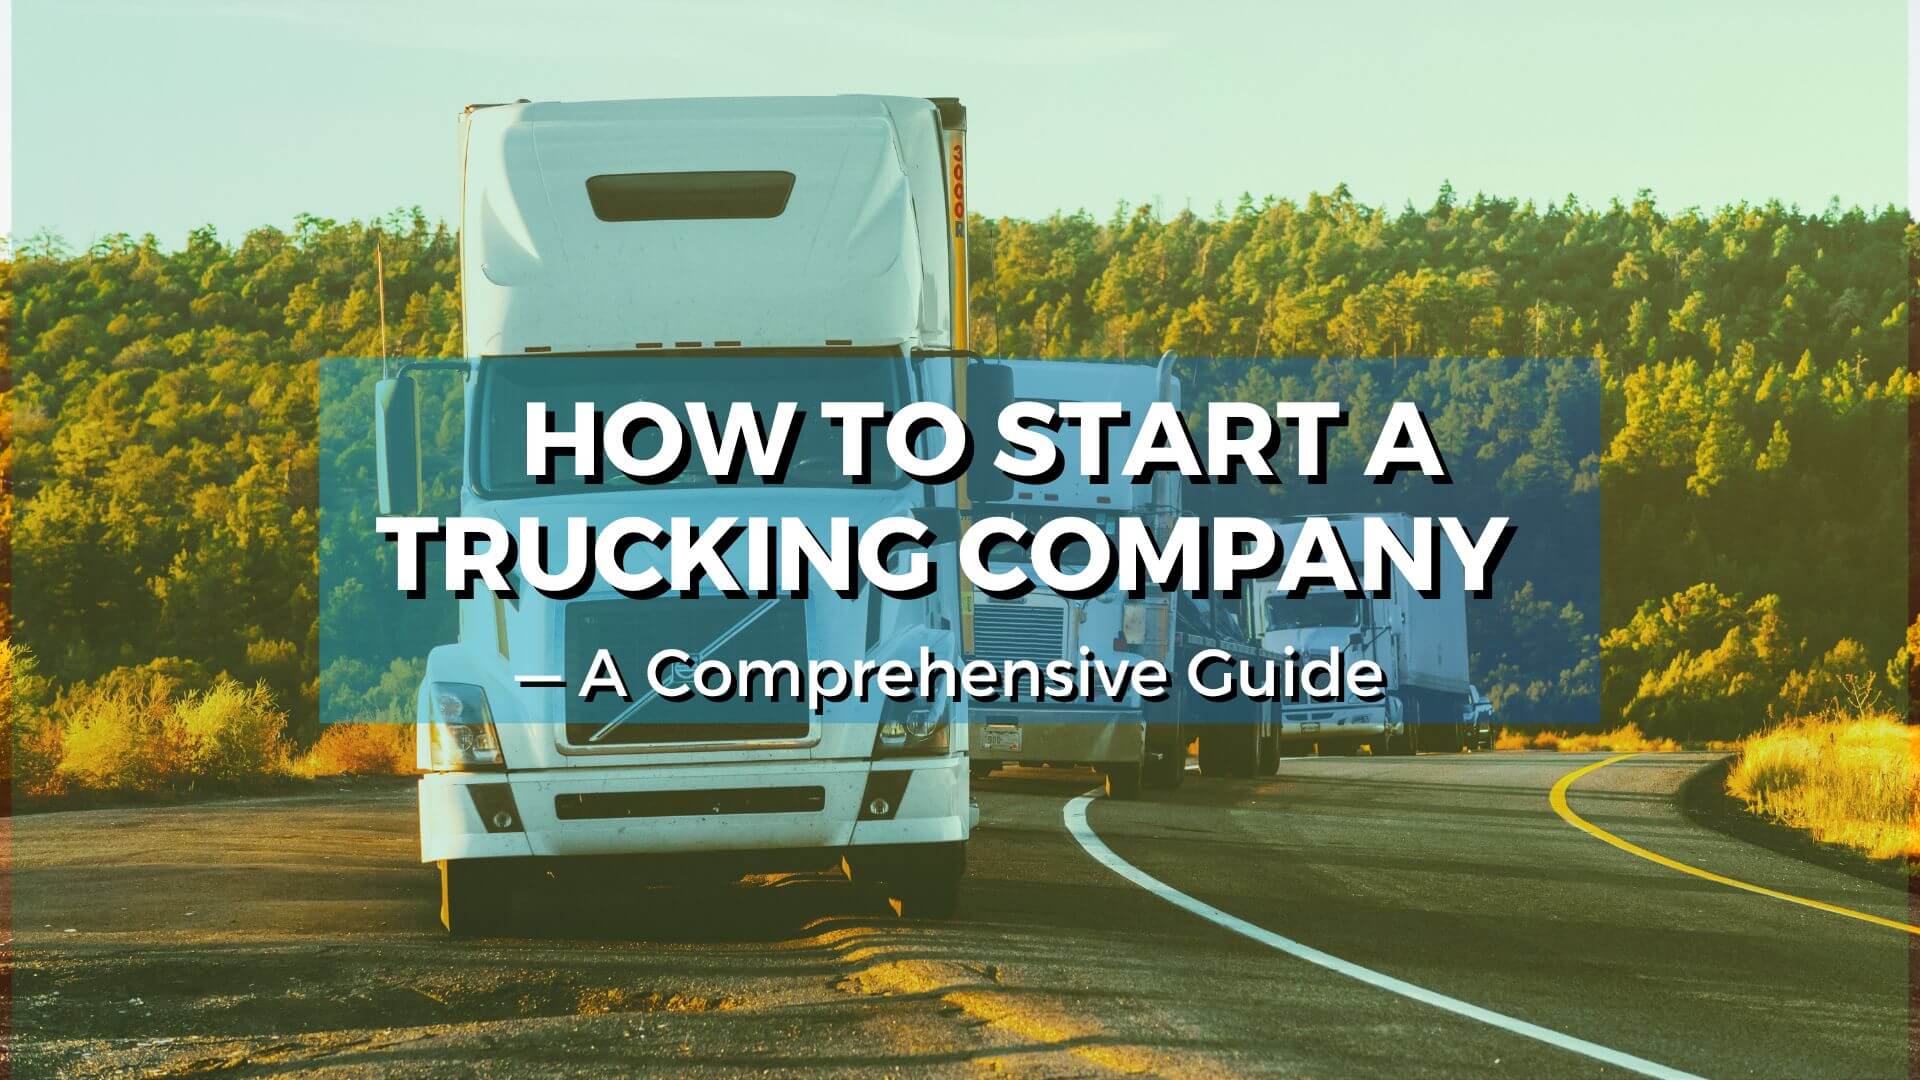 How to start a trucking company? This guide will walk you through to all the necessary steps to help you run a trucking company.